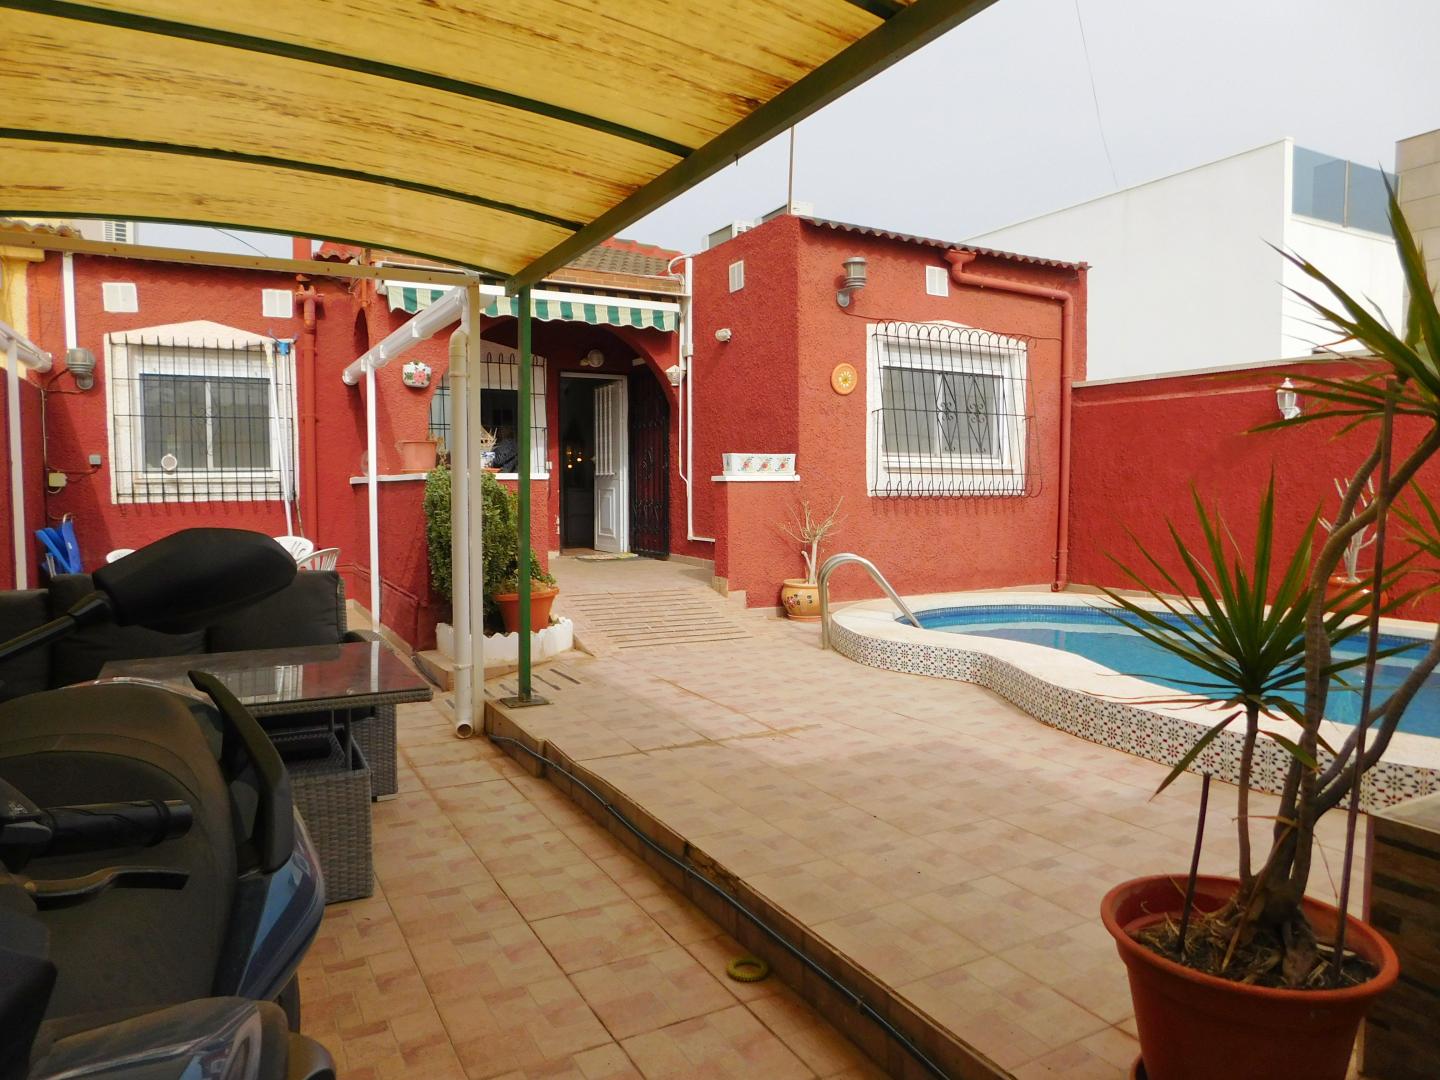 4 Bed, 2 Bath, HouseFor Sale, Torrevieja, Alicante